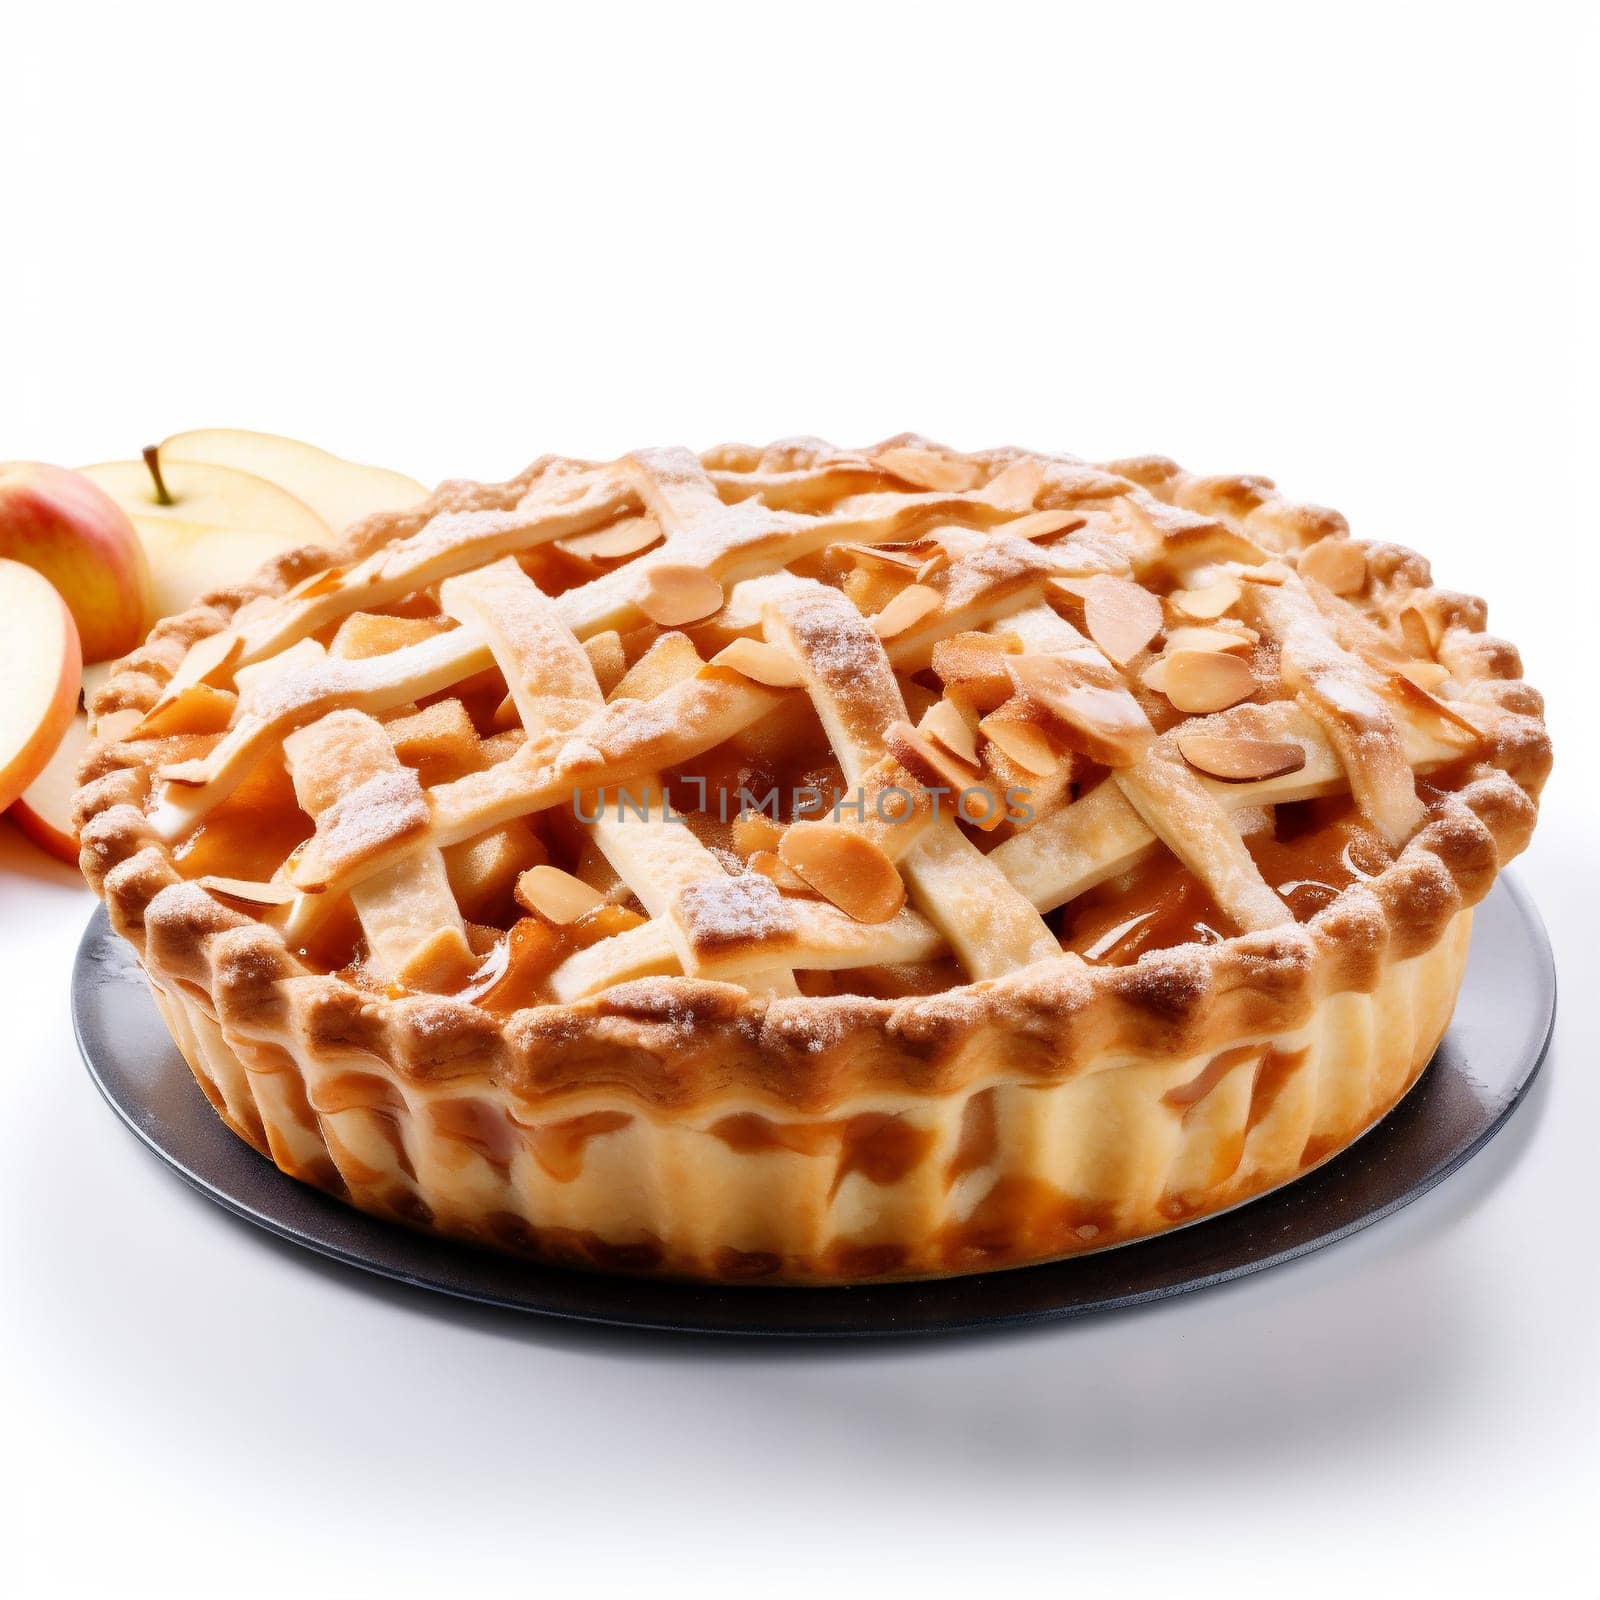 Delicious Traditional Apple Pie Isolated on White Background. Golden Baked Apple Pie with Lattice Decoration. Whole Apple Pie.